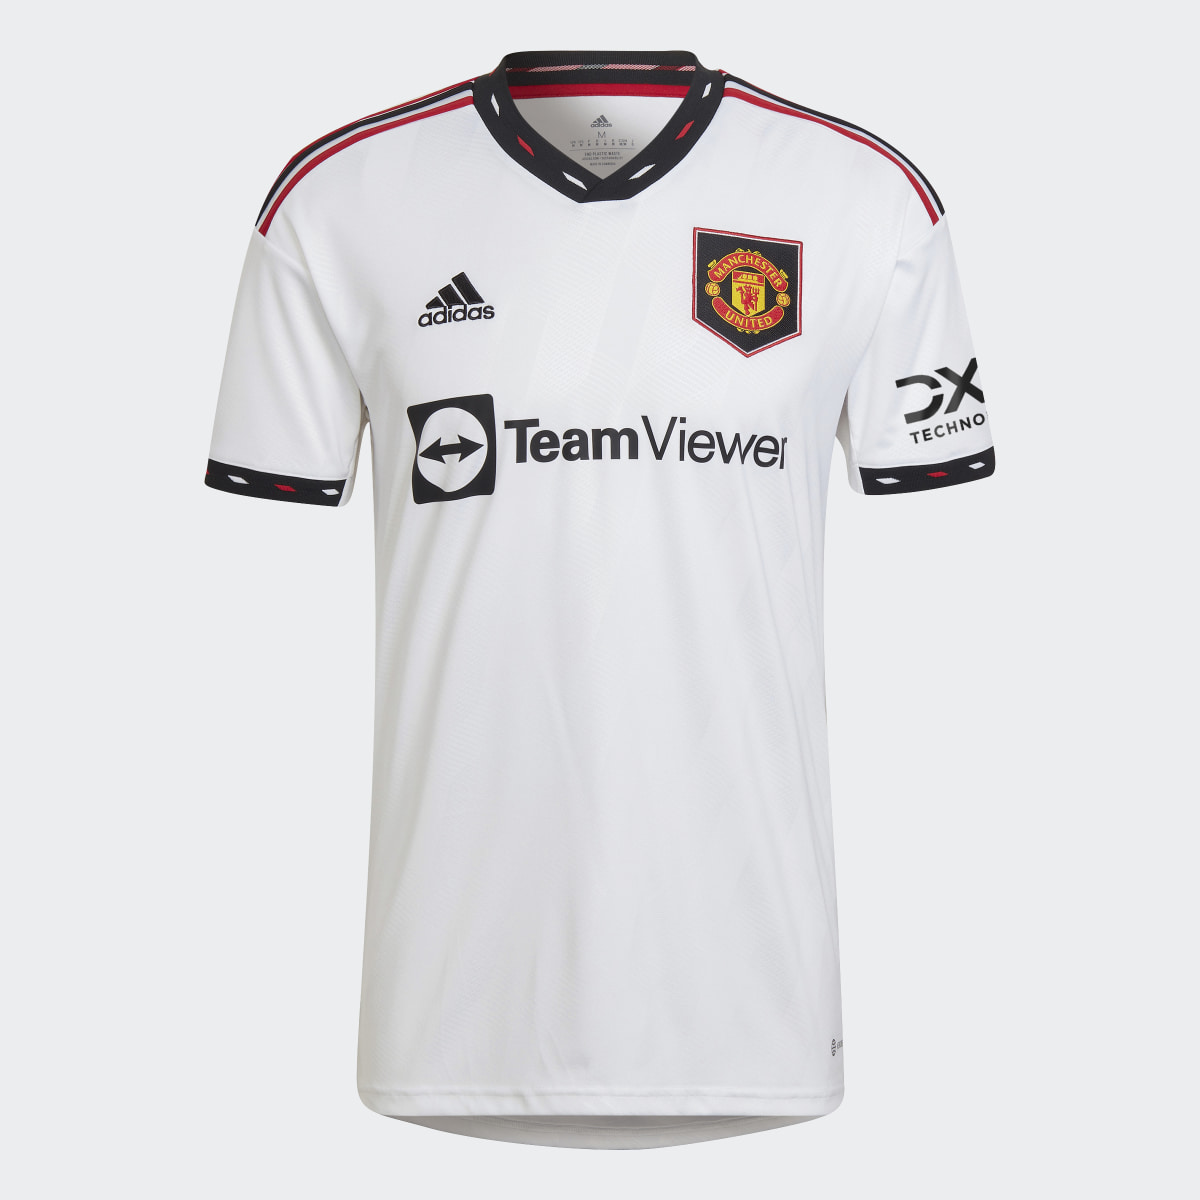 Adidas Manchester United 22/23 Away Jersey. 6